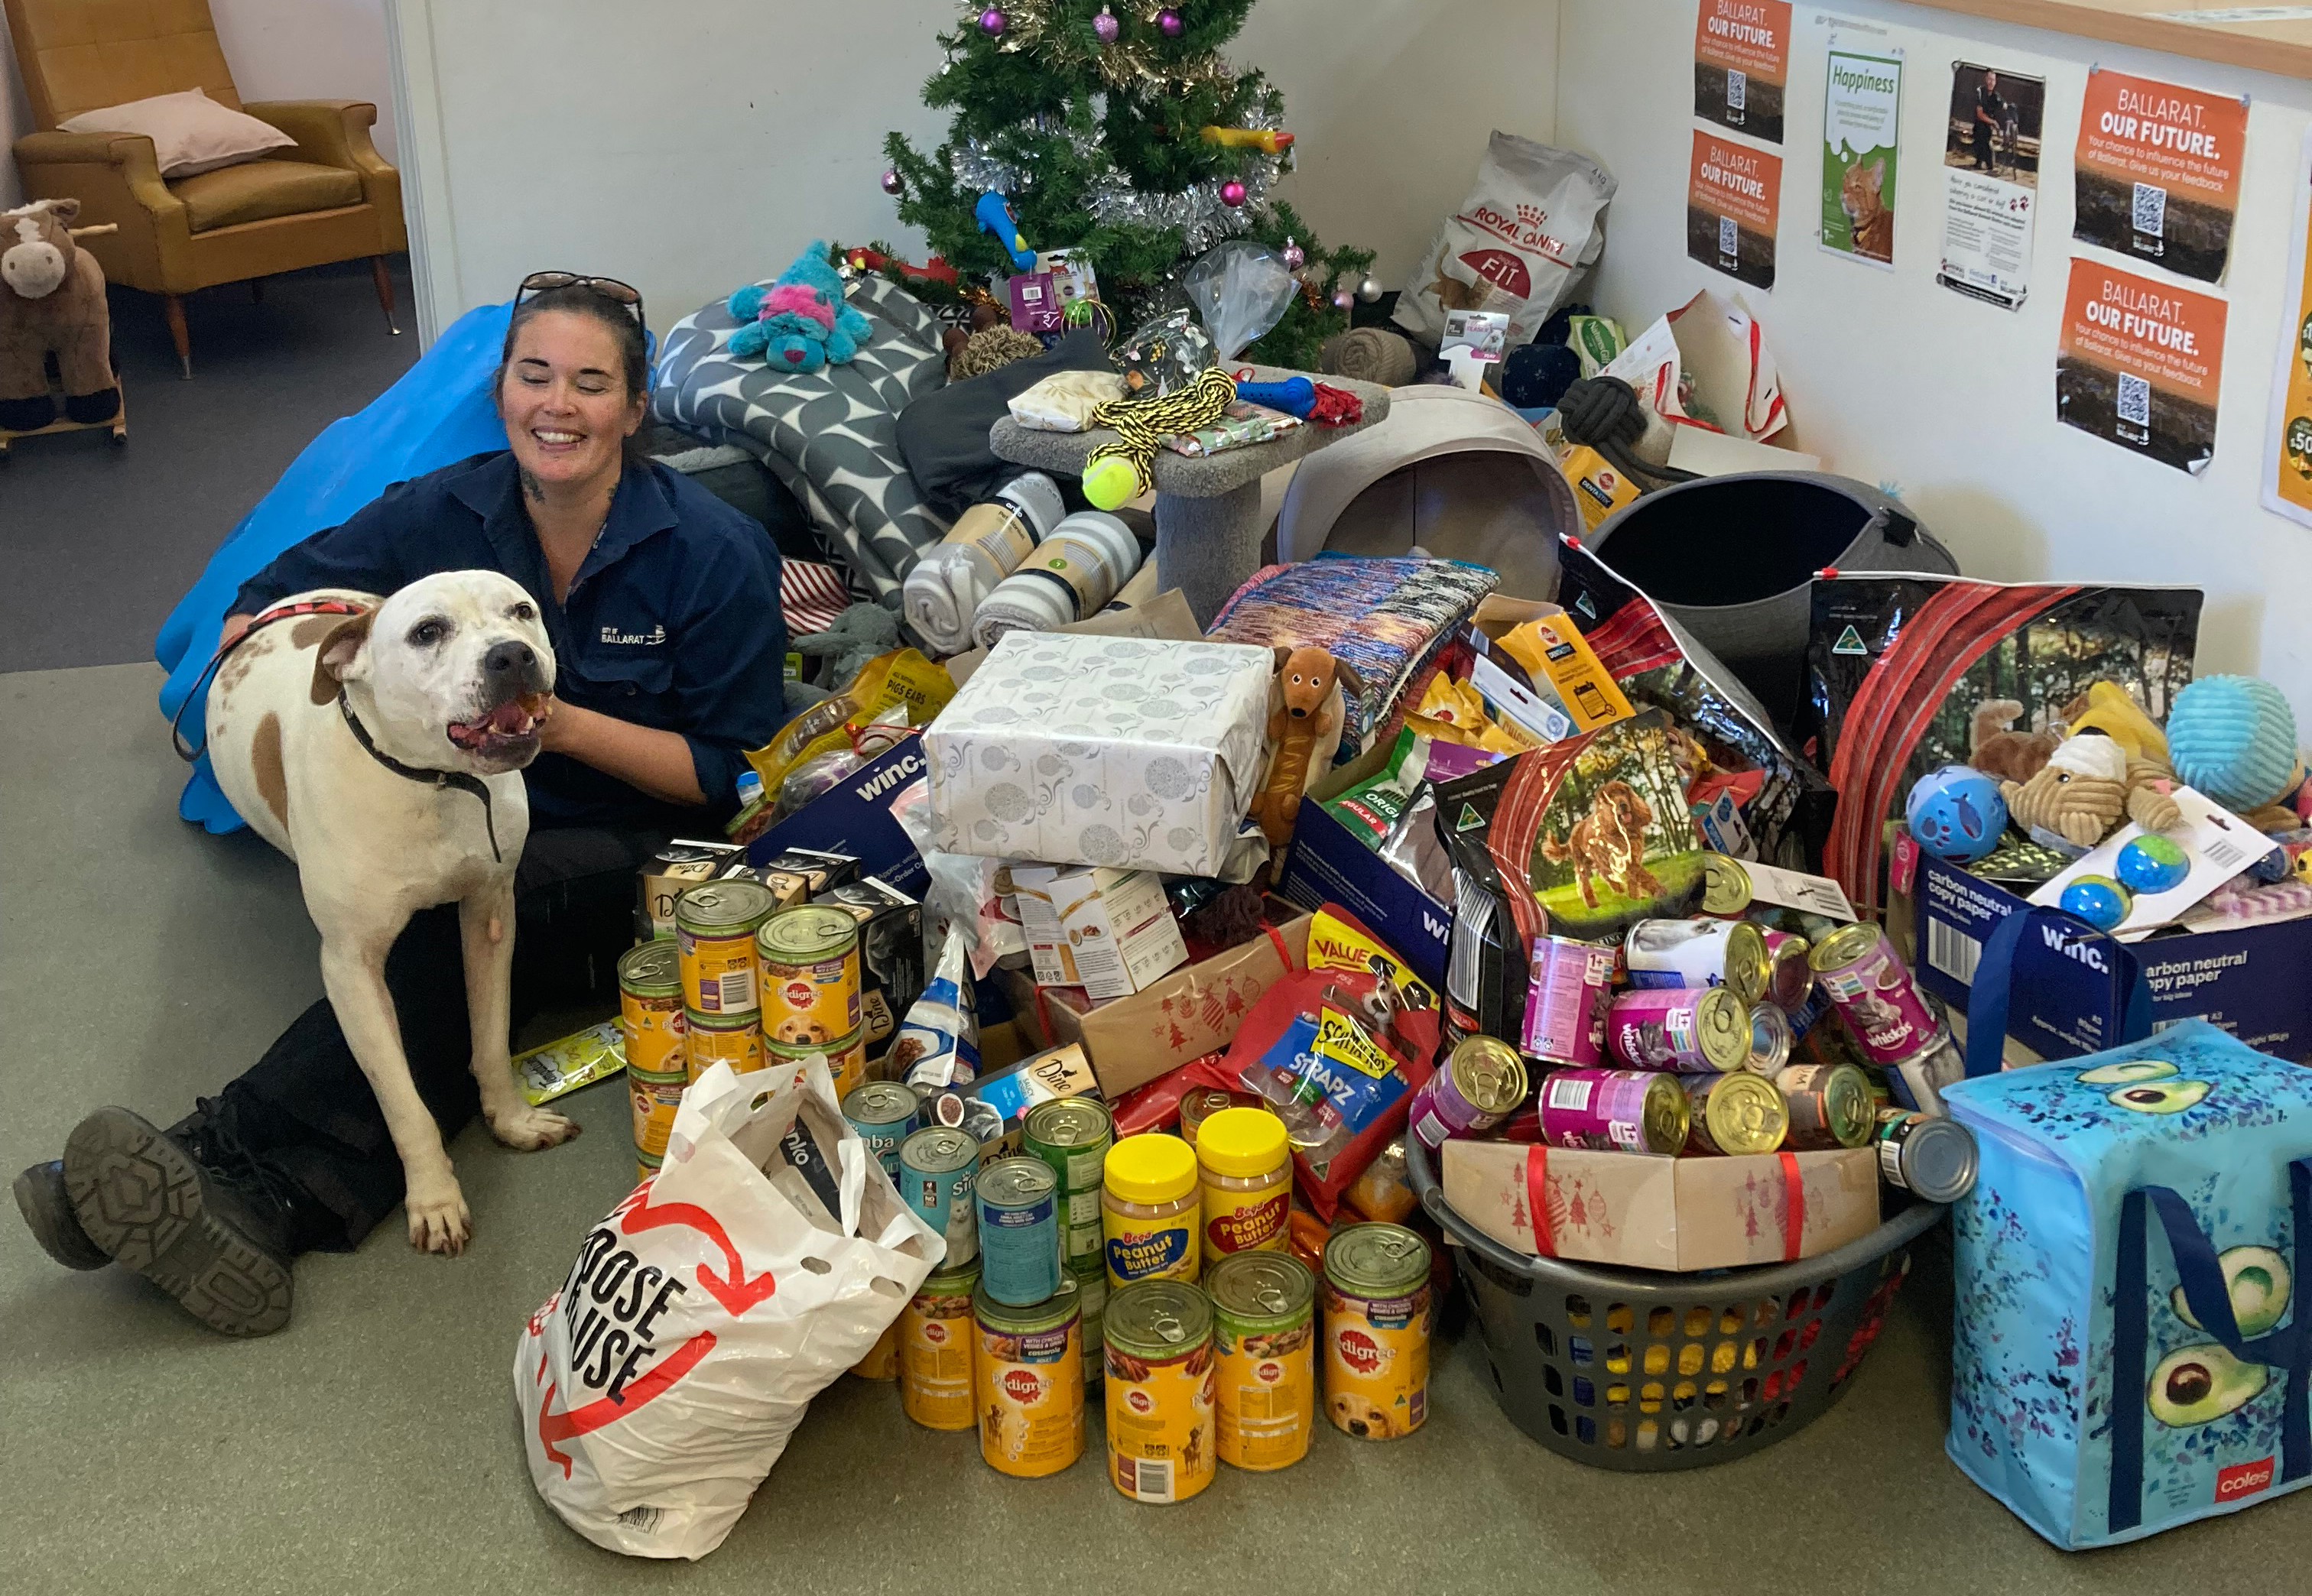 Animal shelter worker with dog and donations of food and pet toys